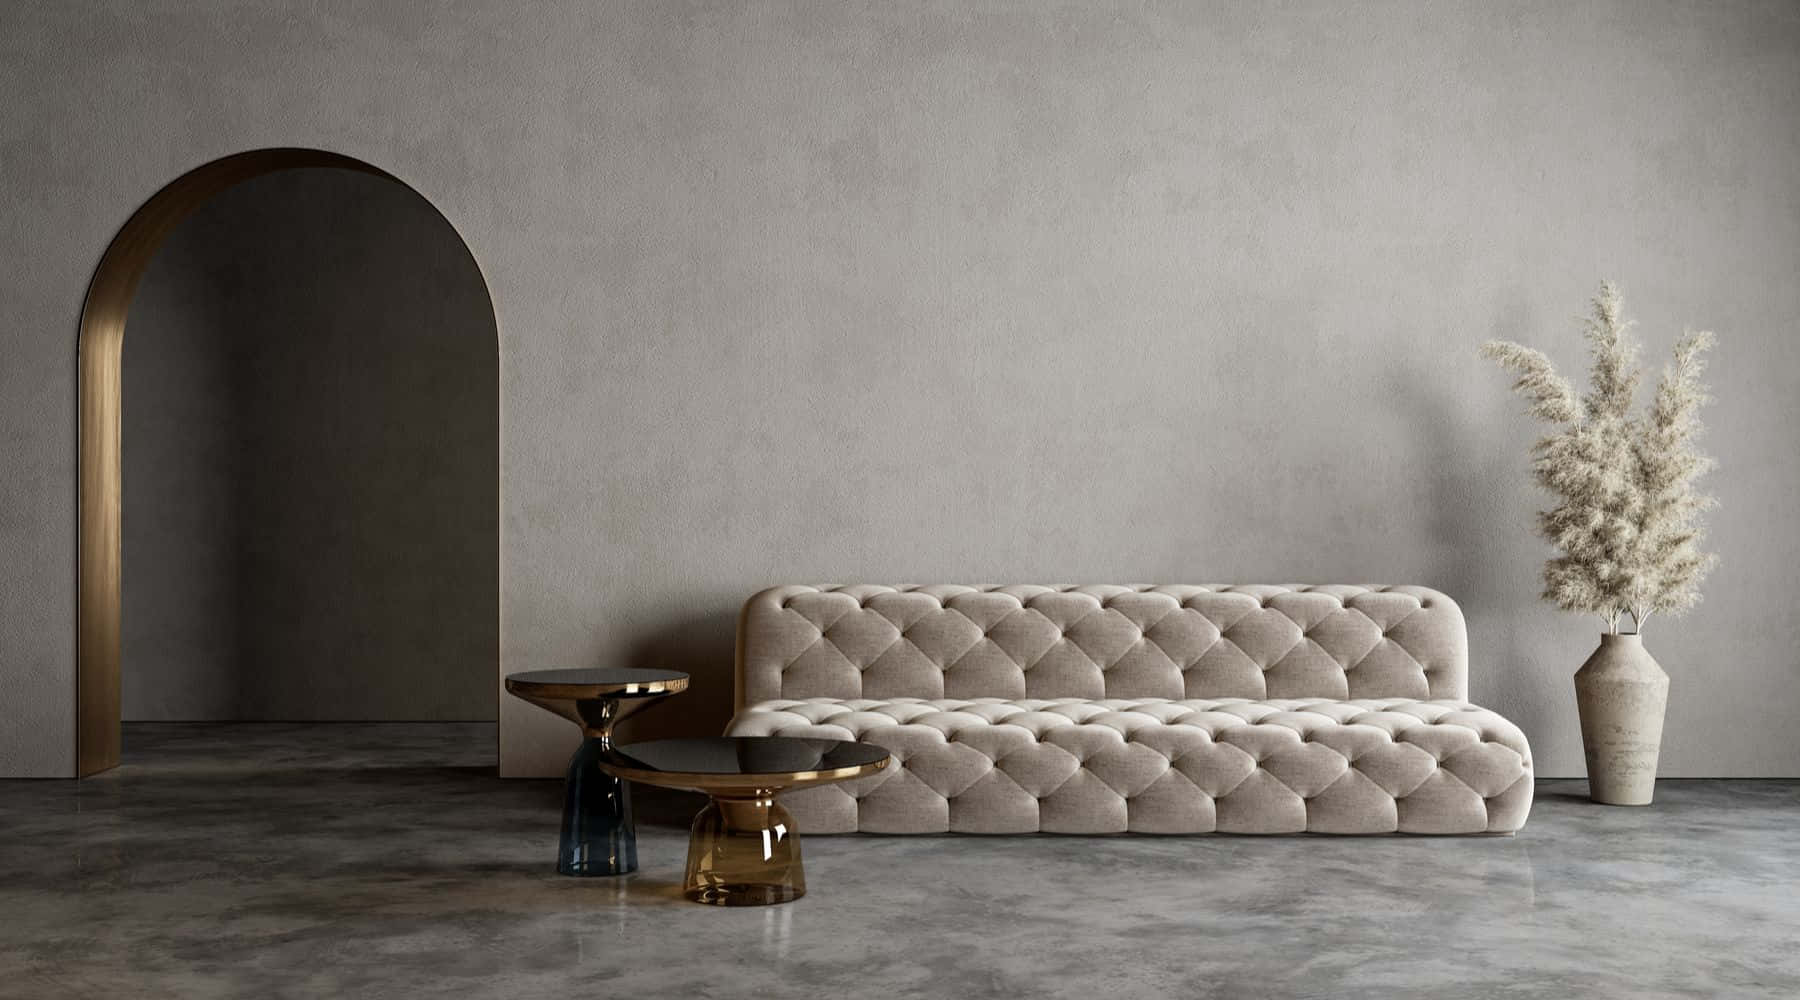 Make your living room look modern with an elegant gray couch